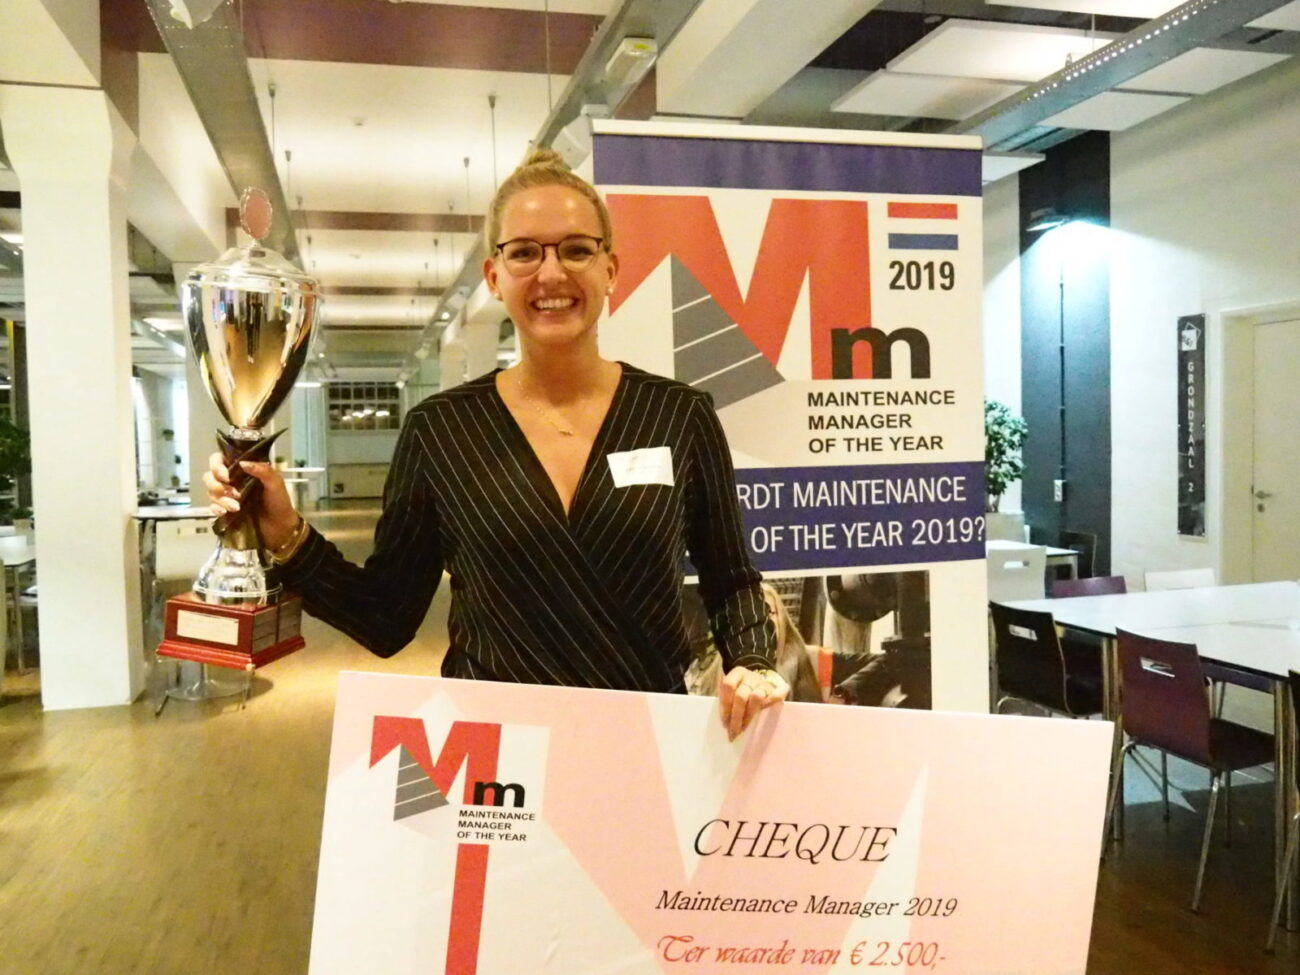 Maintenance Manager of the Year 2019